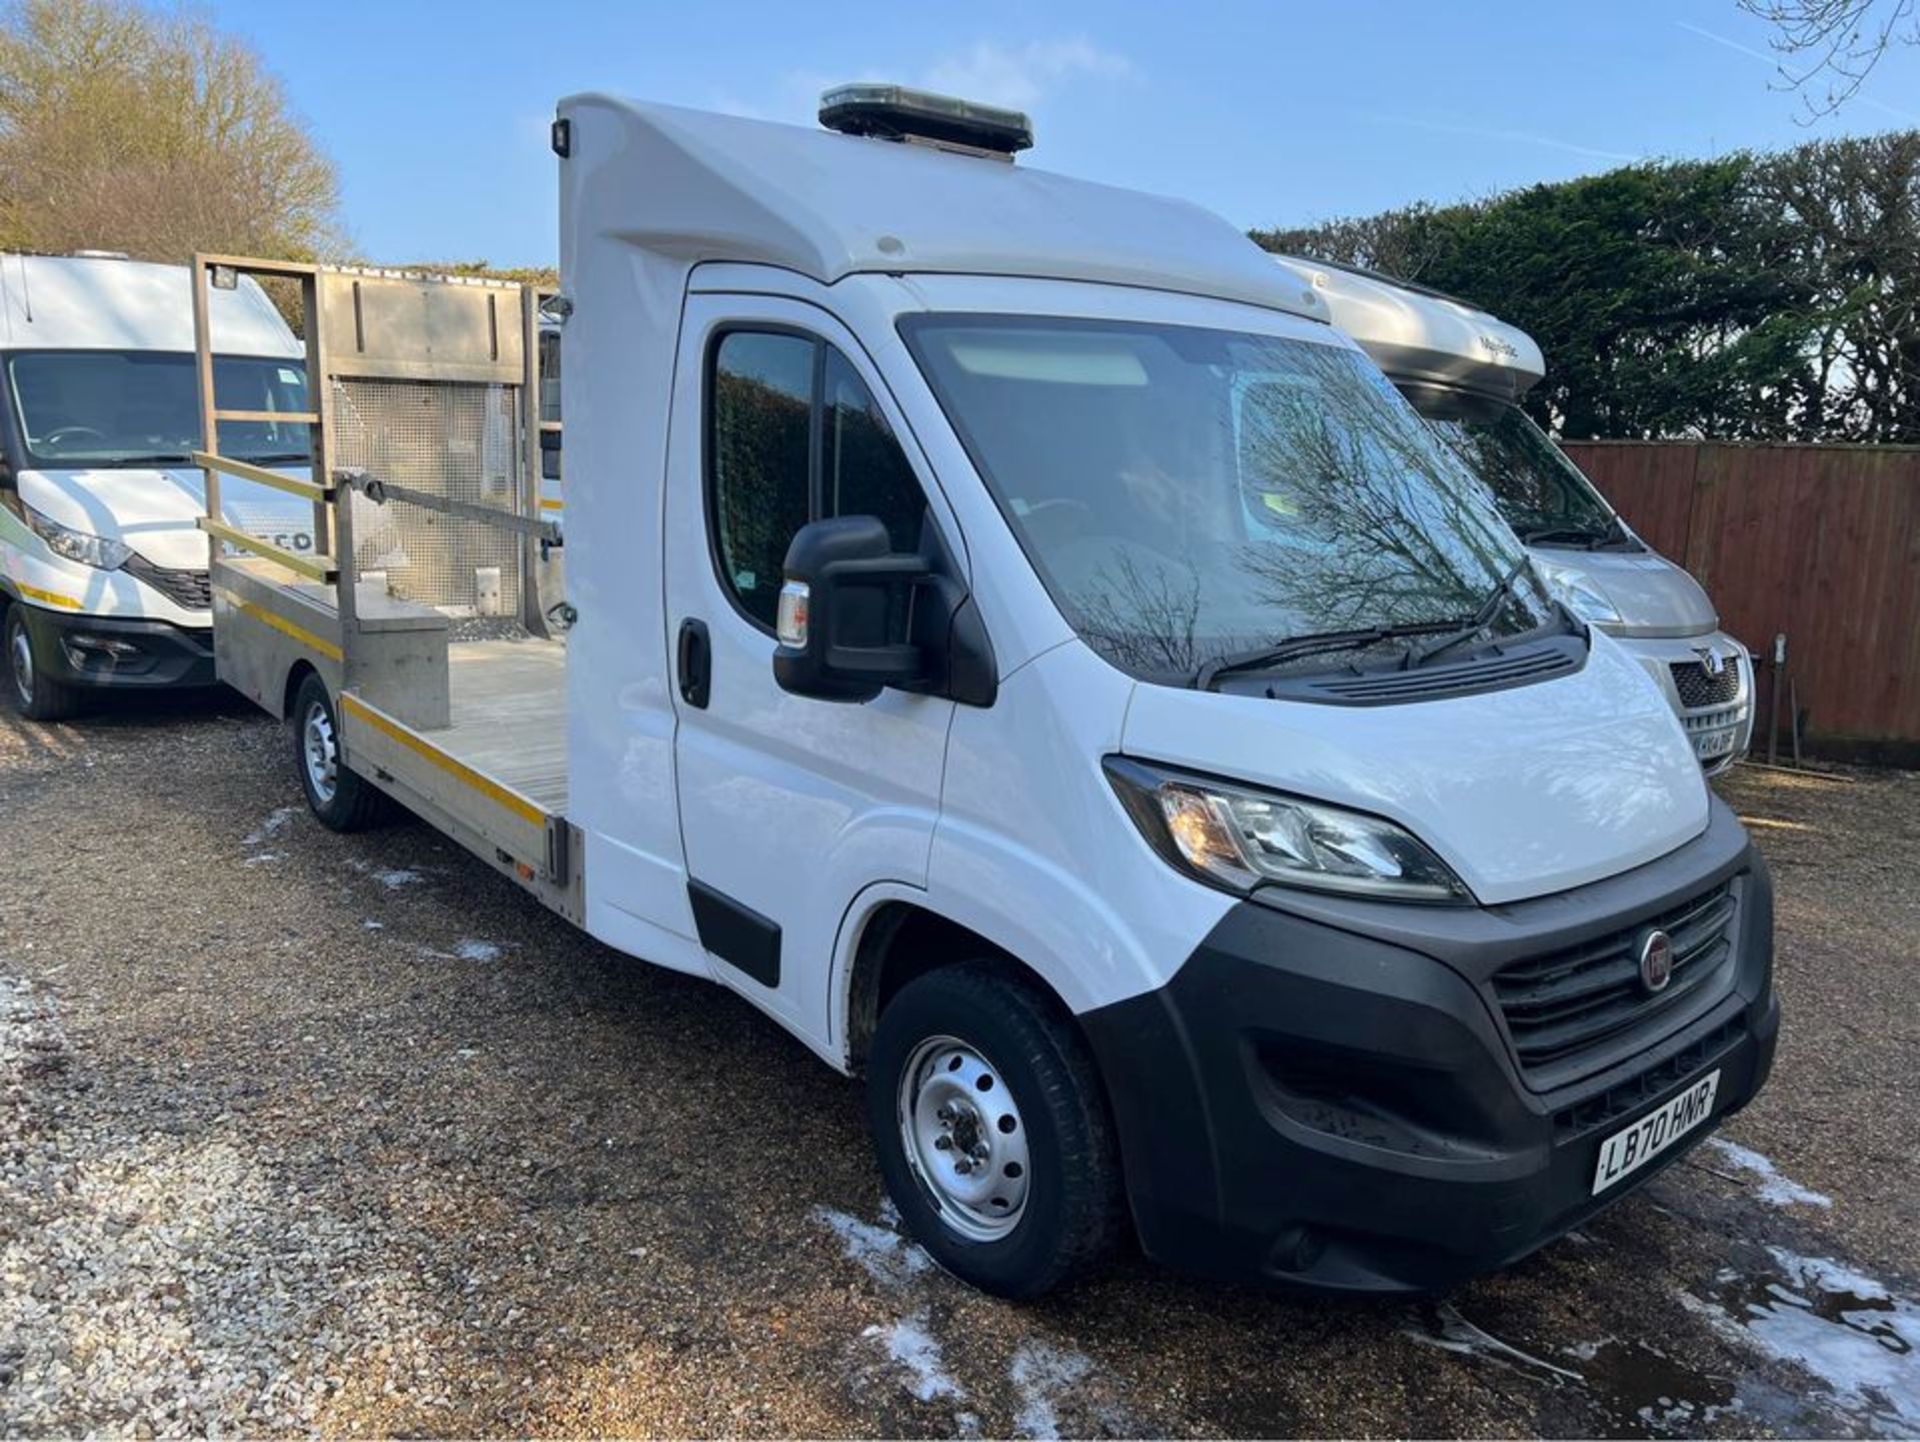 2021, FIAT Ducato - 2.3 TD, Low Load E6 Dropside Traffic Management Truck - Image 2 of 10